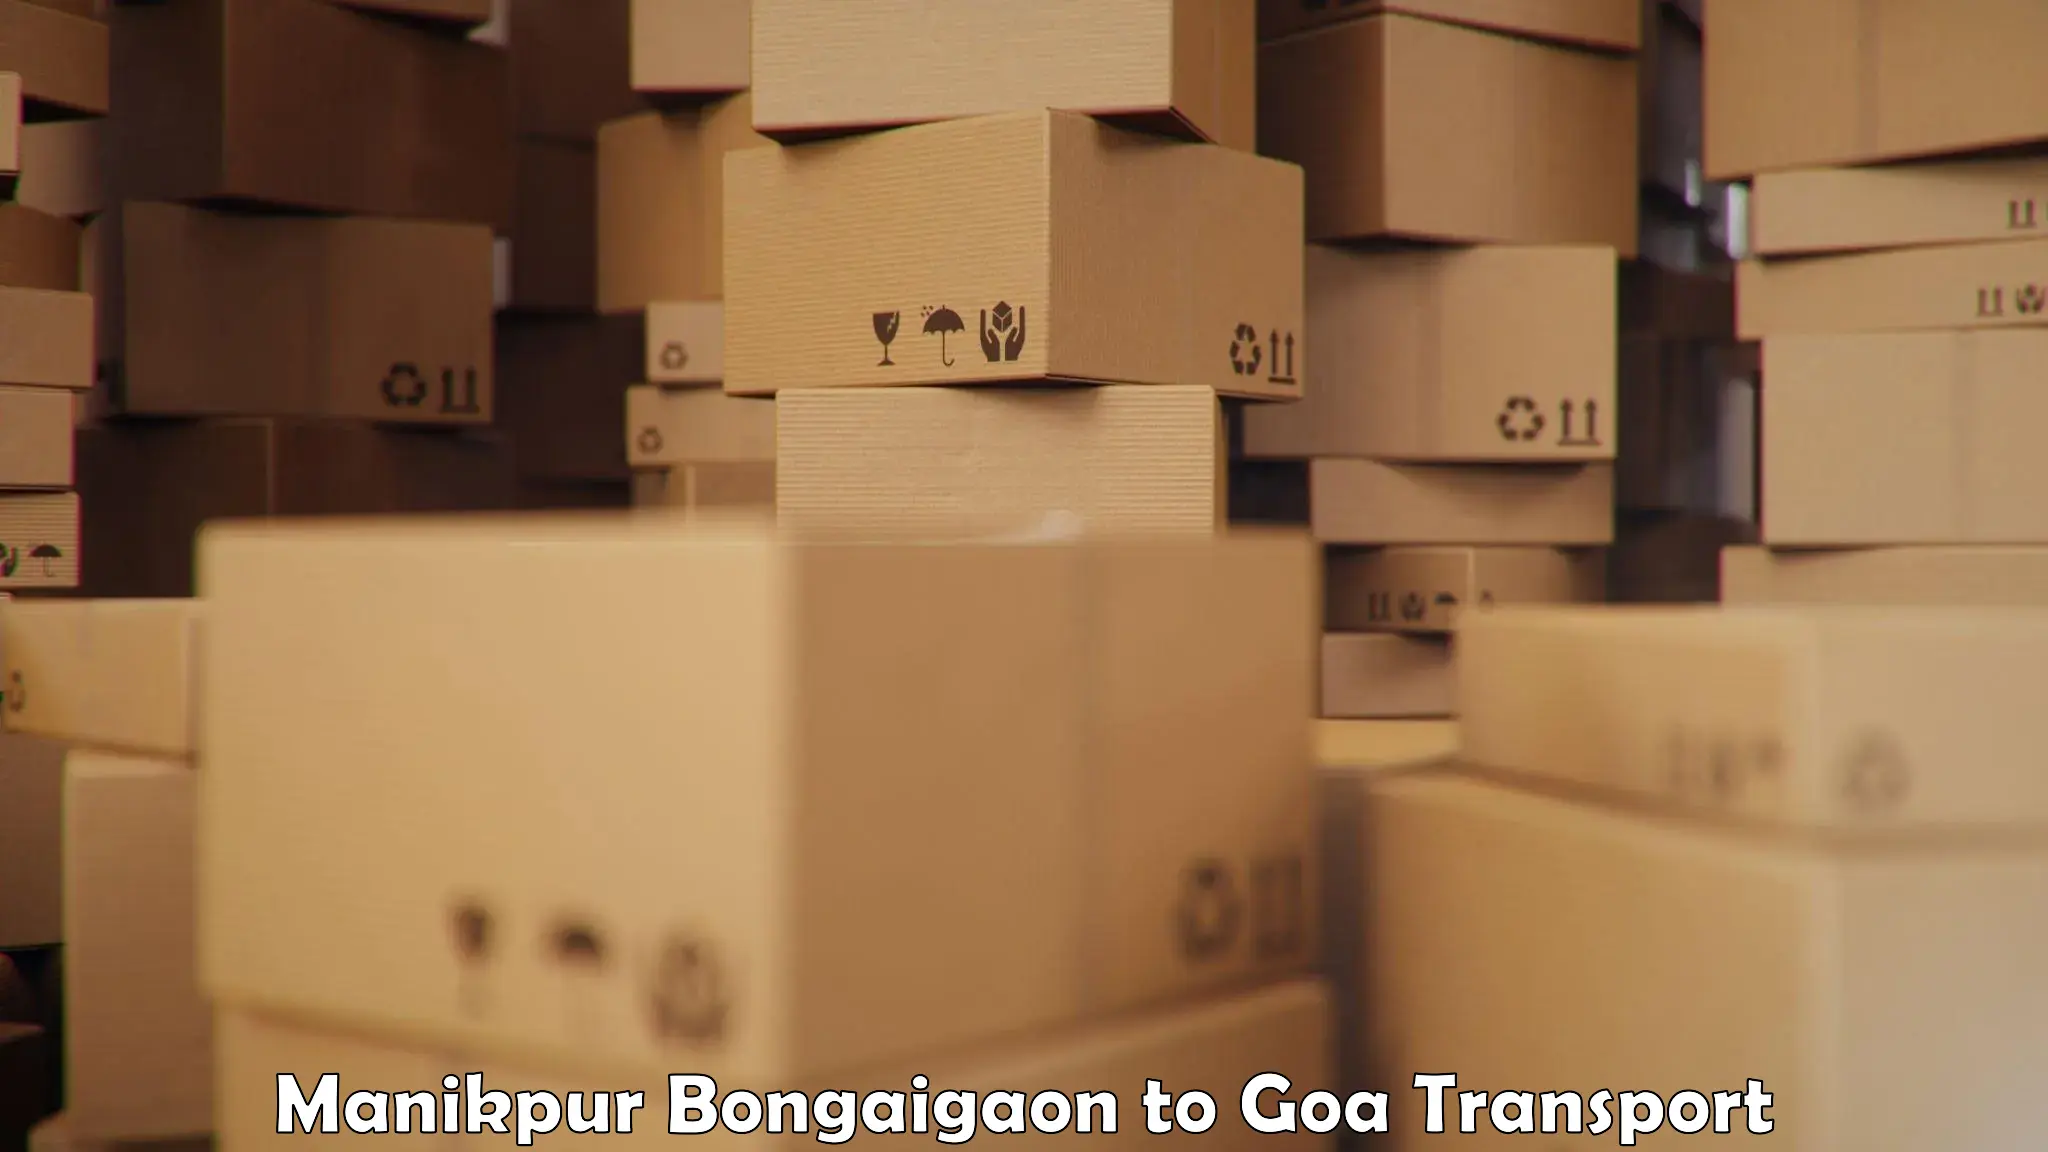 Container transport service in Manikpur Bongaigaon to Margao